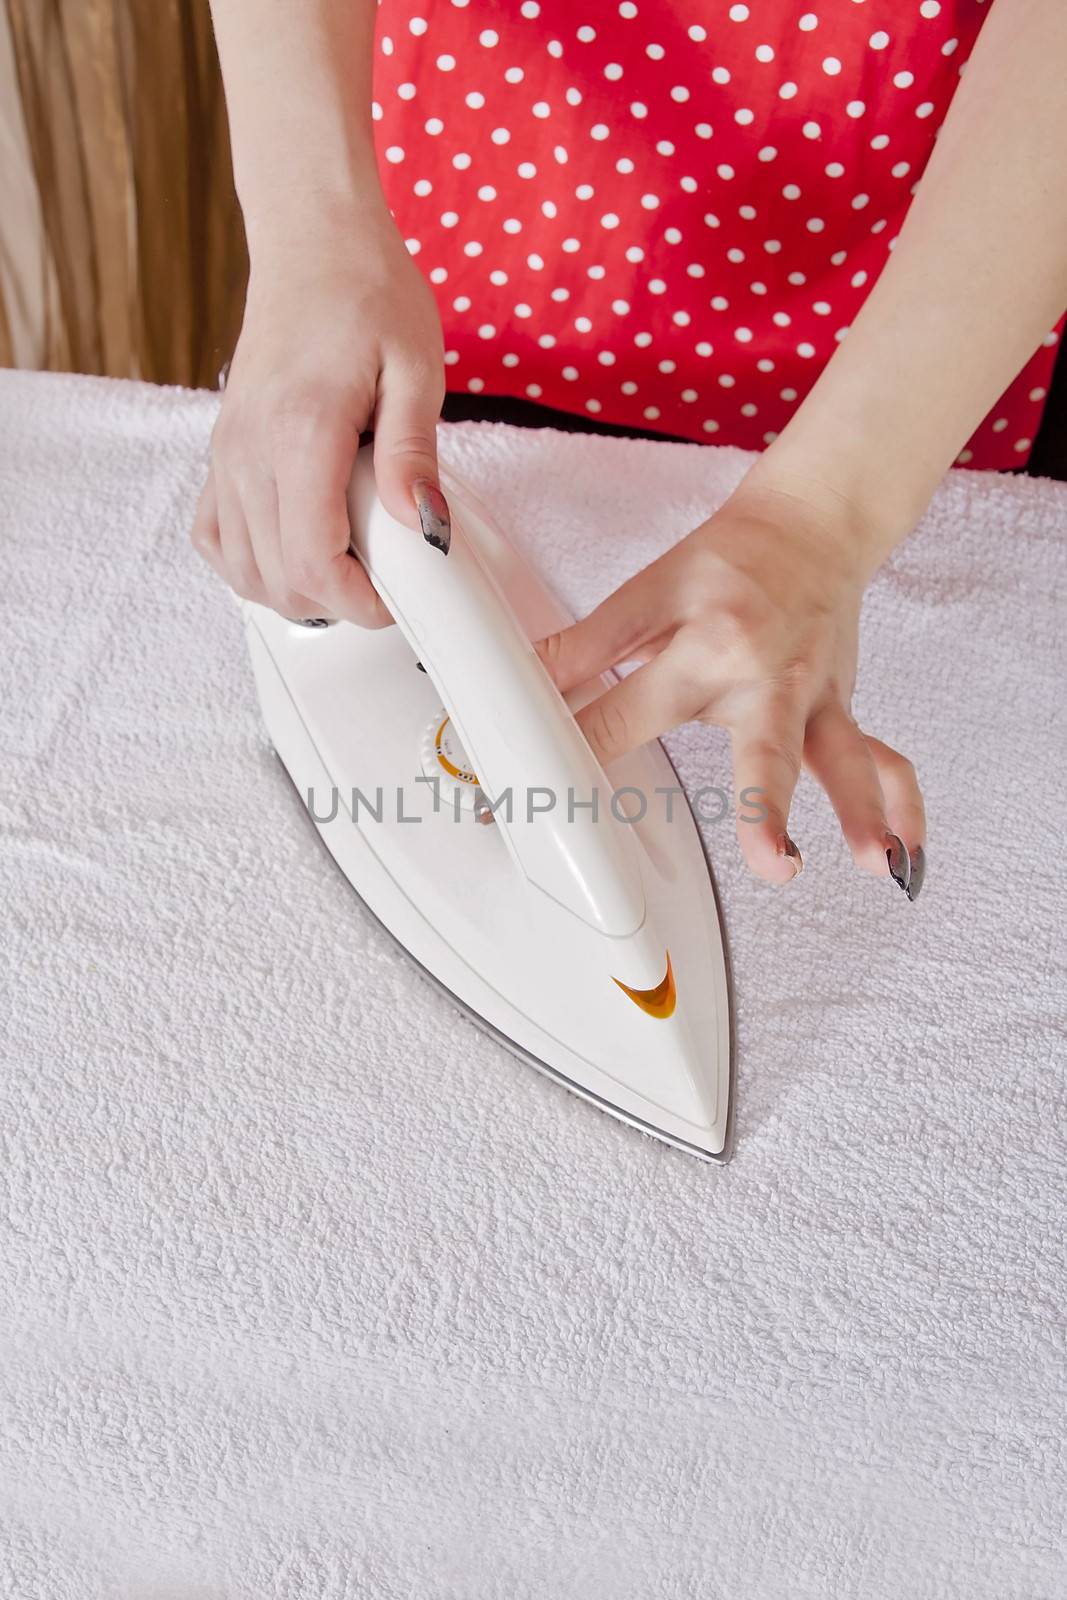 Female hand ironing clothes by dukibu